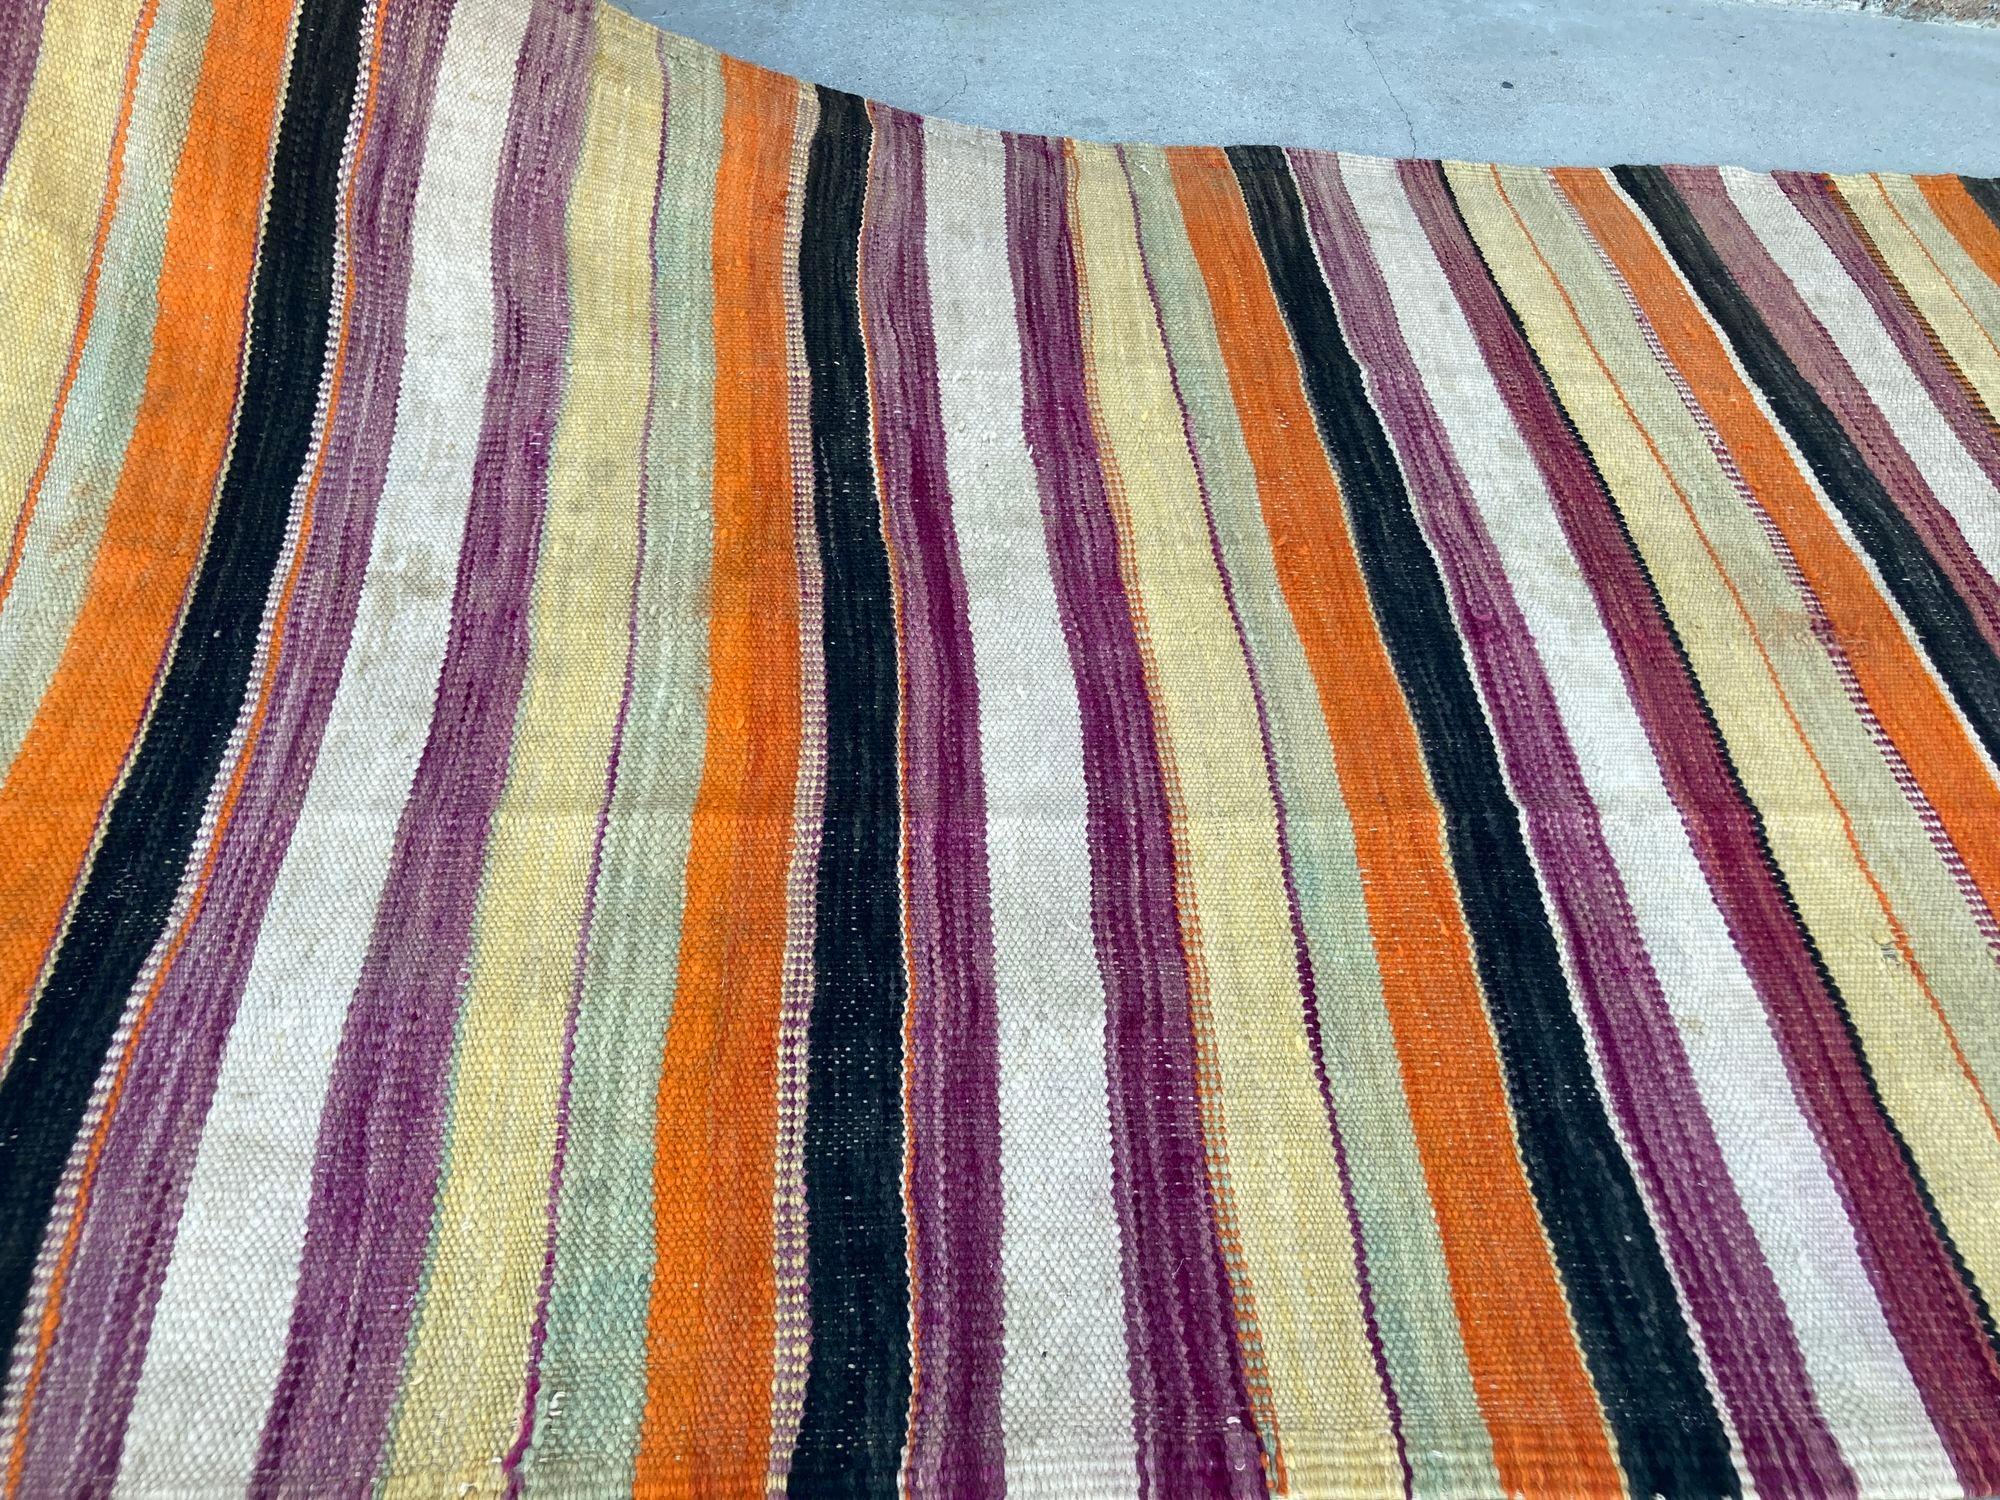 1960s Moroccan Tribal Rug Handwoven North African Ethnic Textile Floor Covering For Sale 12